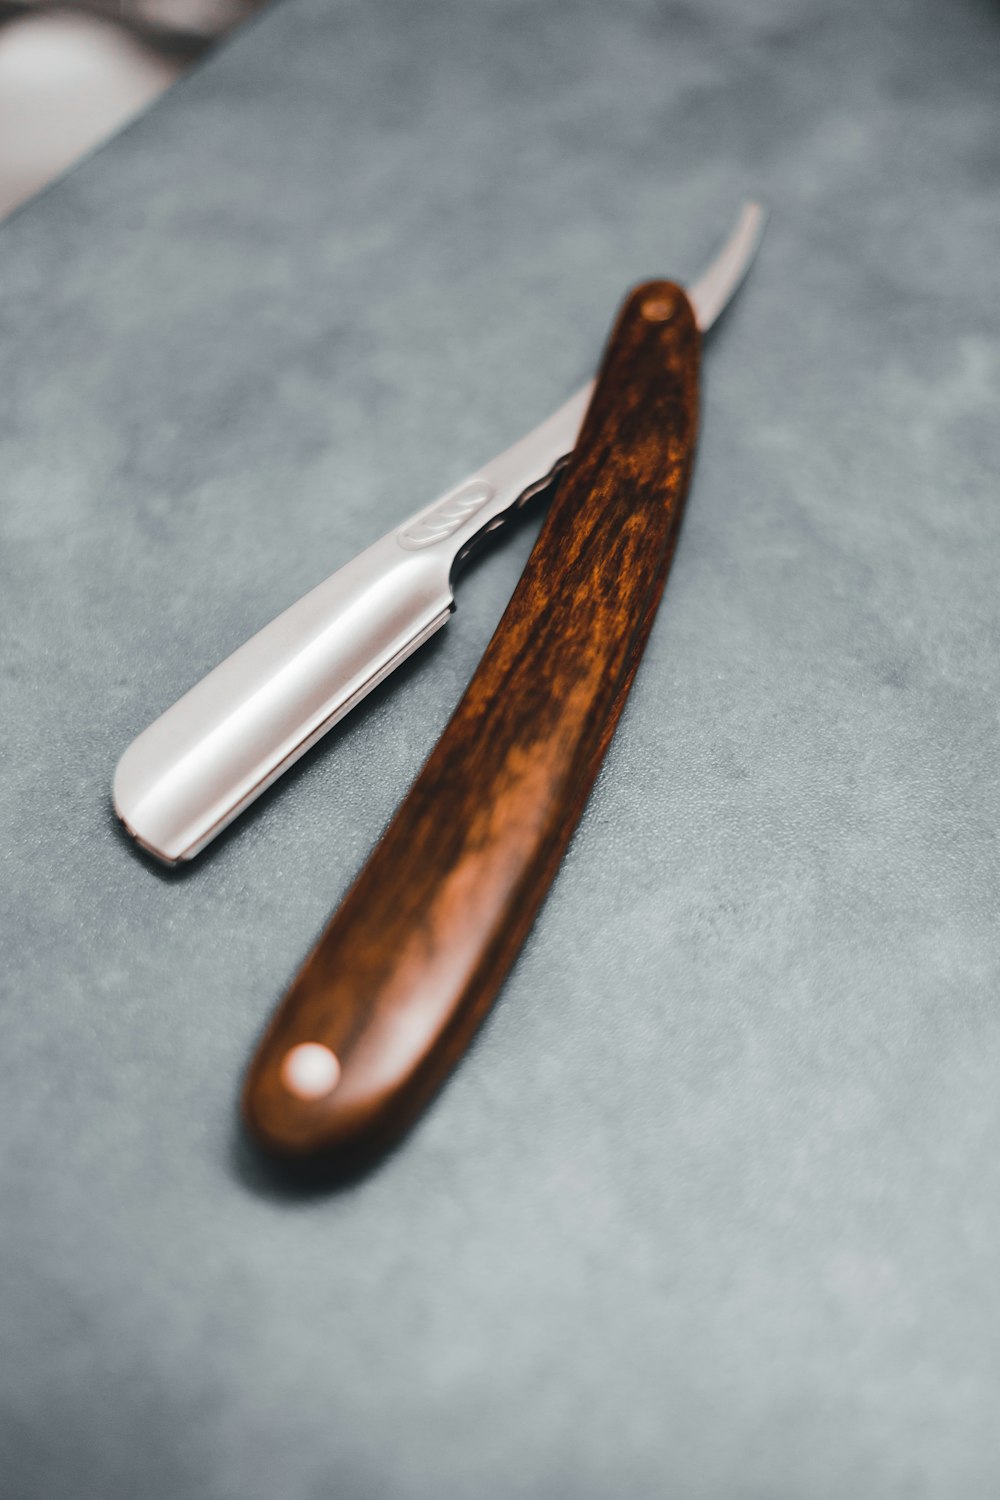 brown handle knife on blue textile